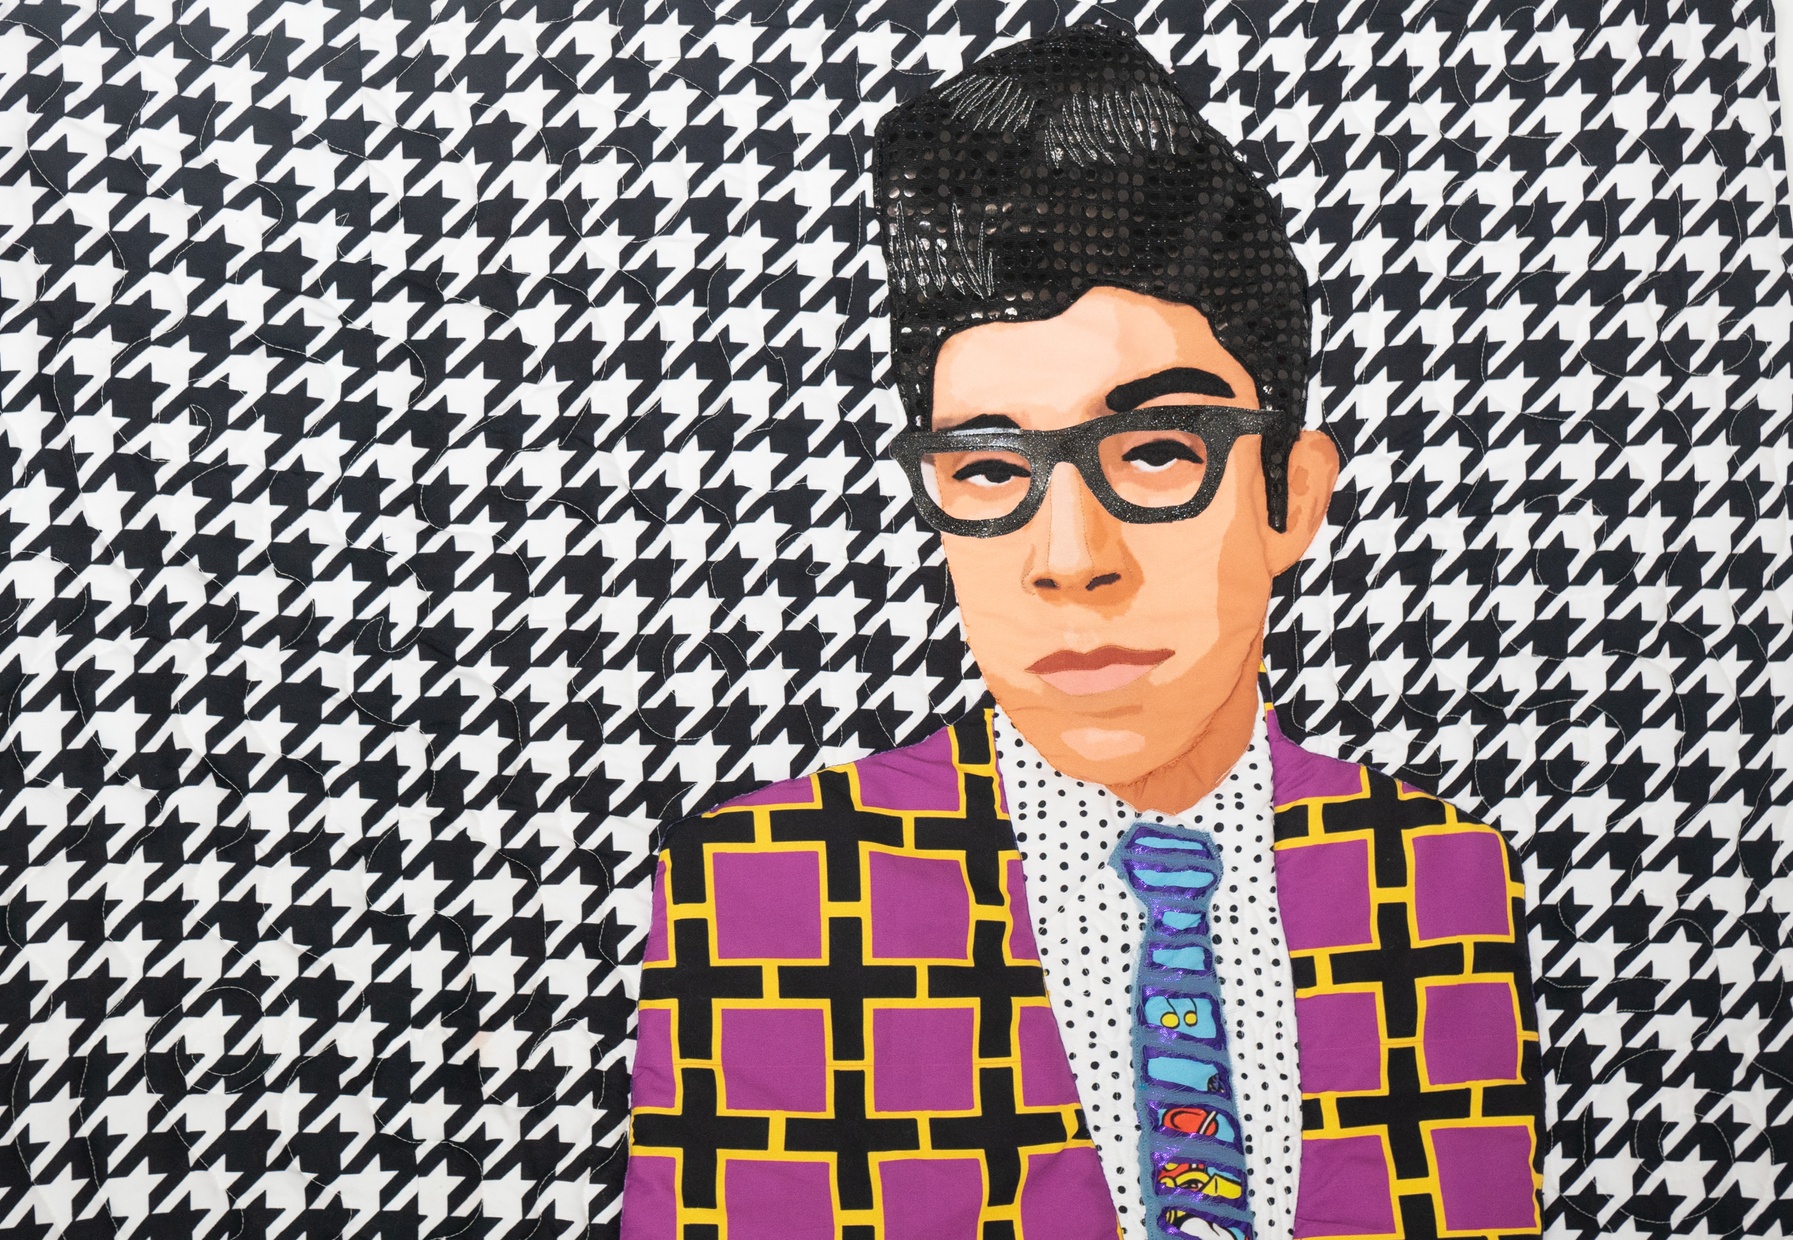 Detail of a collage portrait of a Latino man wearing a tie and plus-sign patterned jacket on a patterned background. 